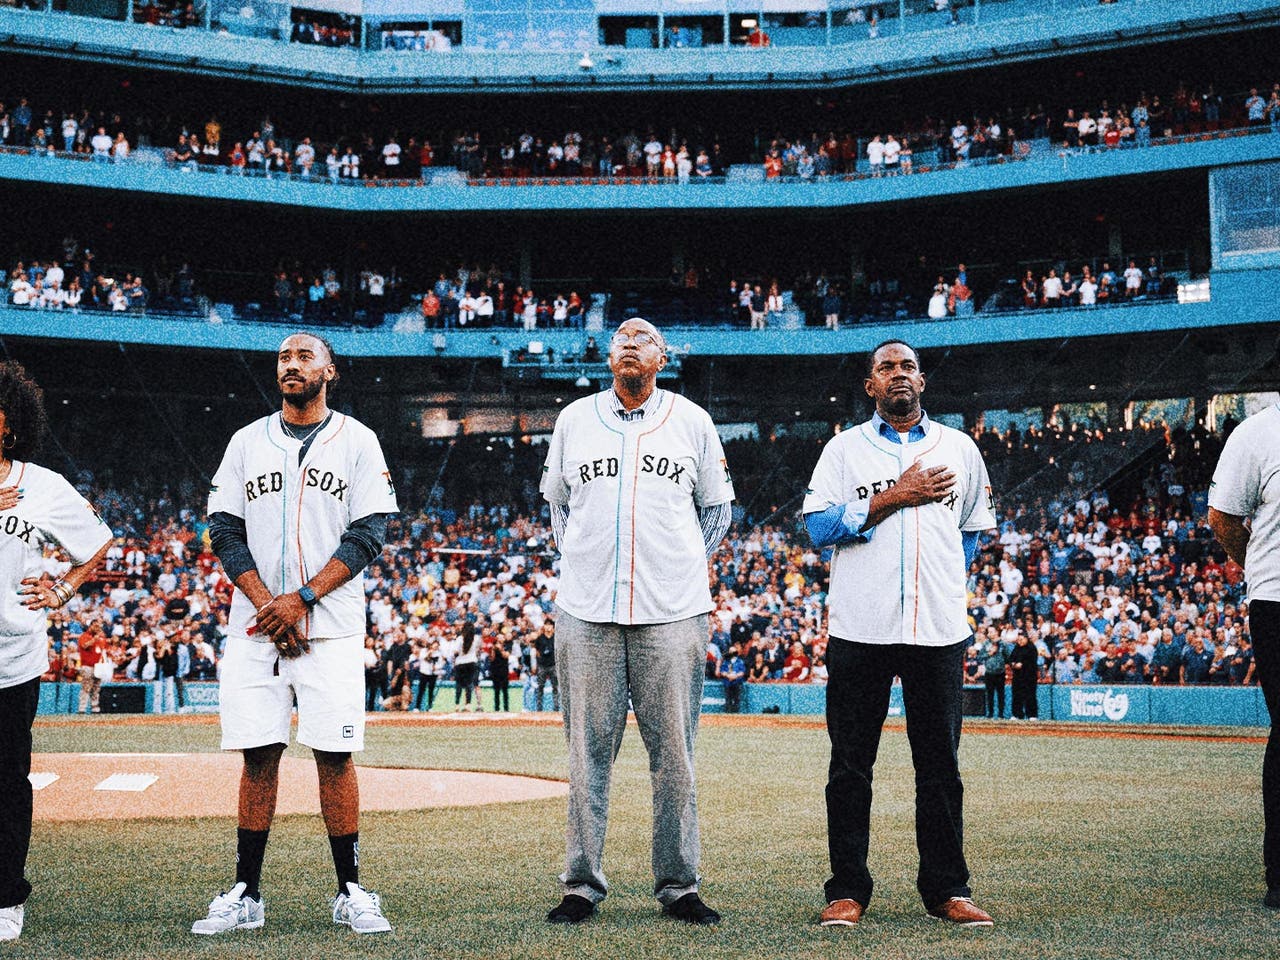 Red Sox, Nationals, A's among MLB teams commemorating Juneteenth